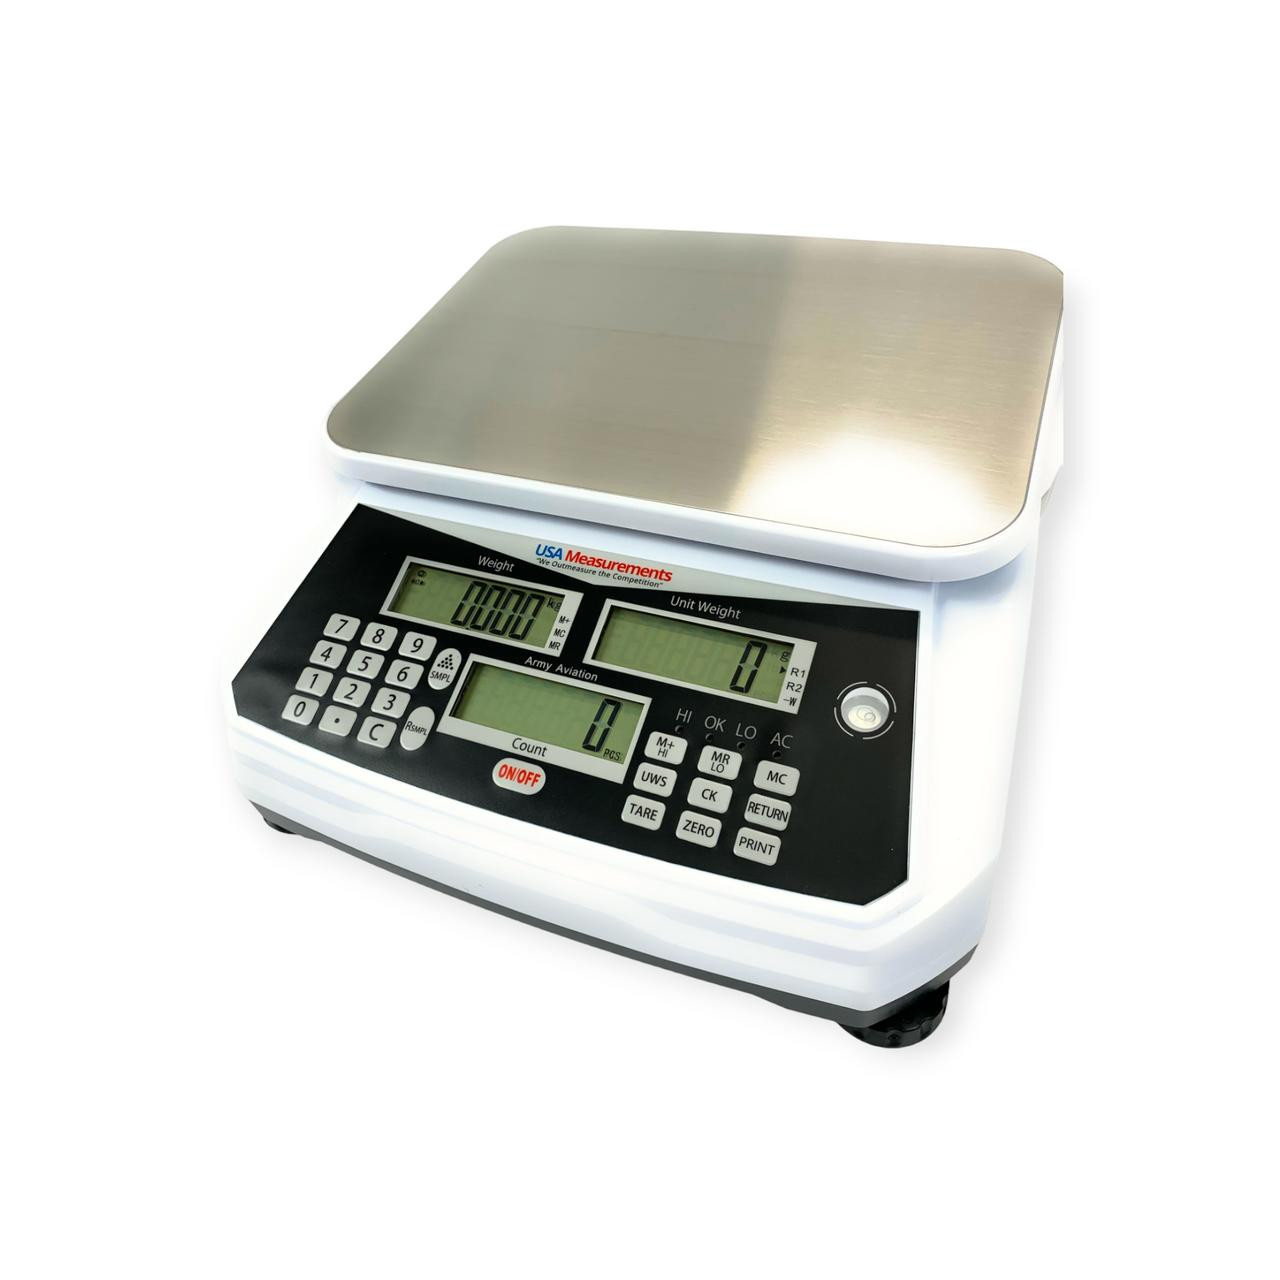 5 Core Kitchen Scale Digital Food Scales Bascula Electronic